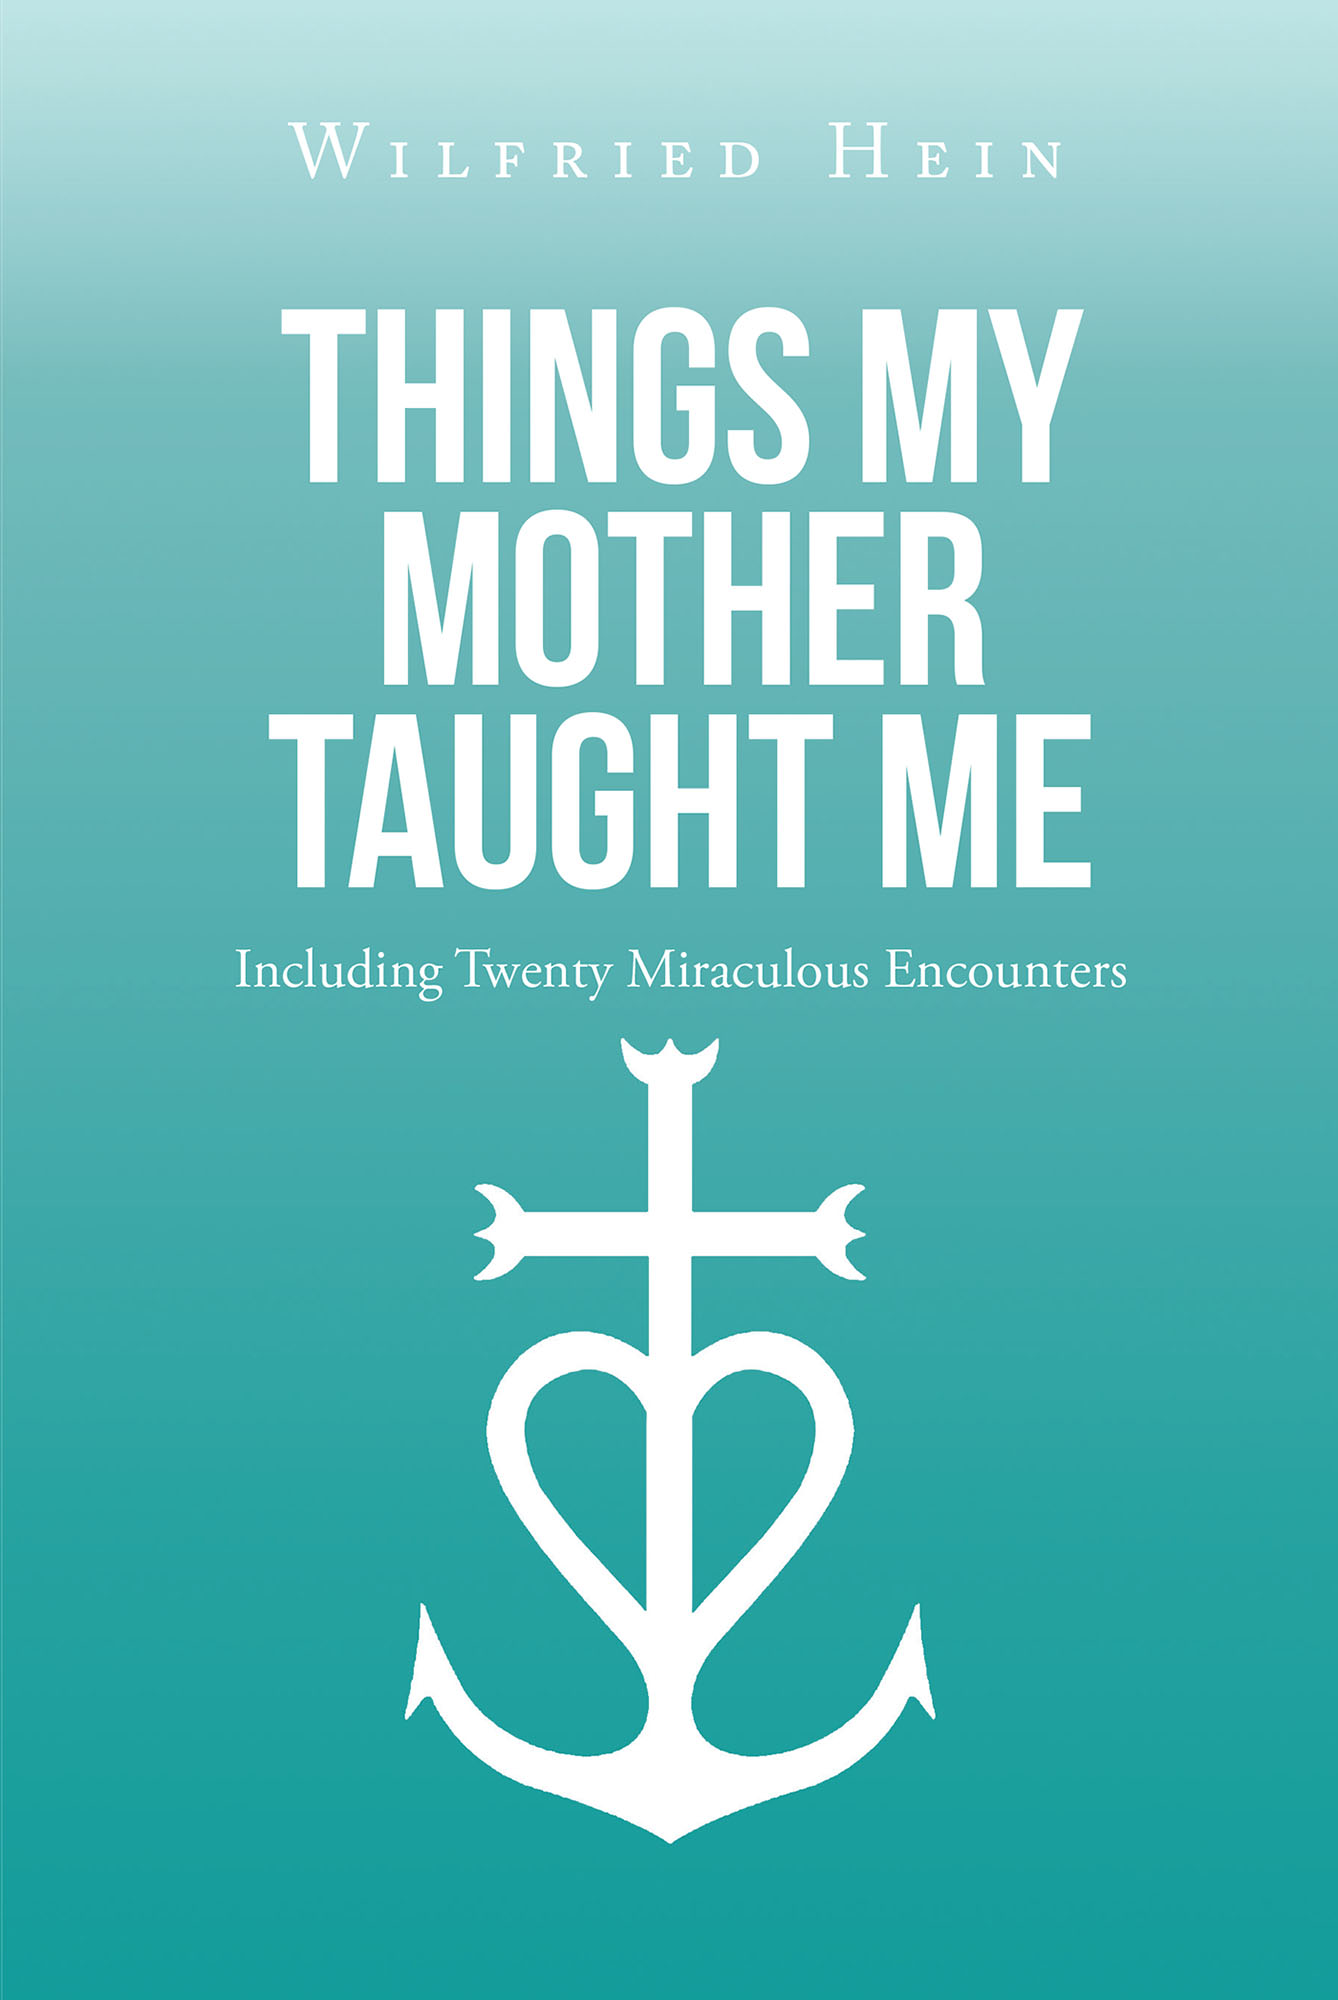 Wilfried Heins Newly Released “things My Mother Taught Me” Is A 